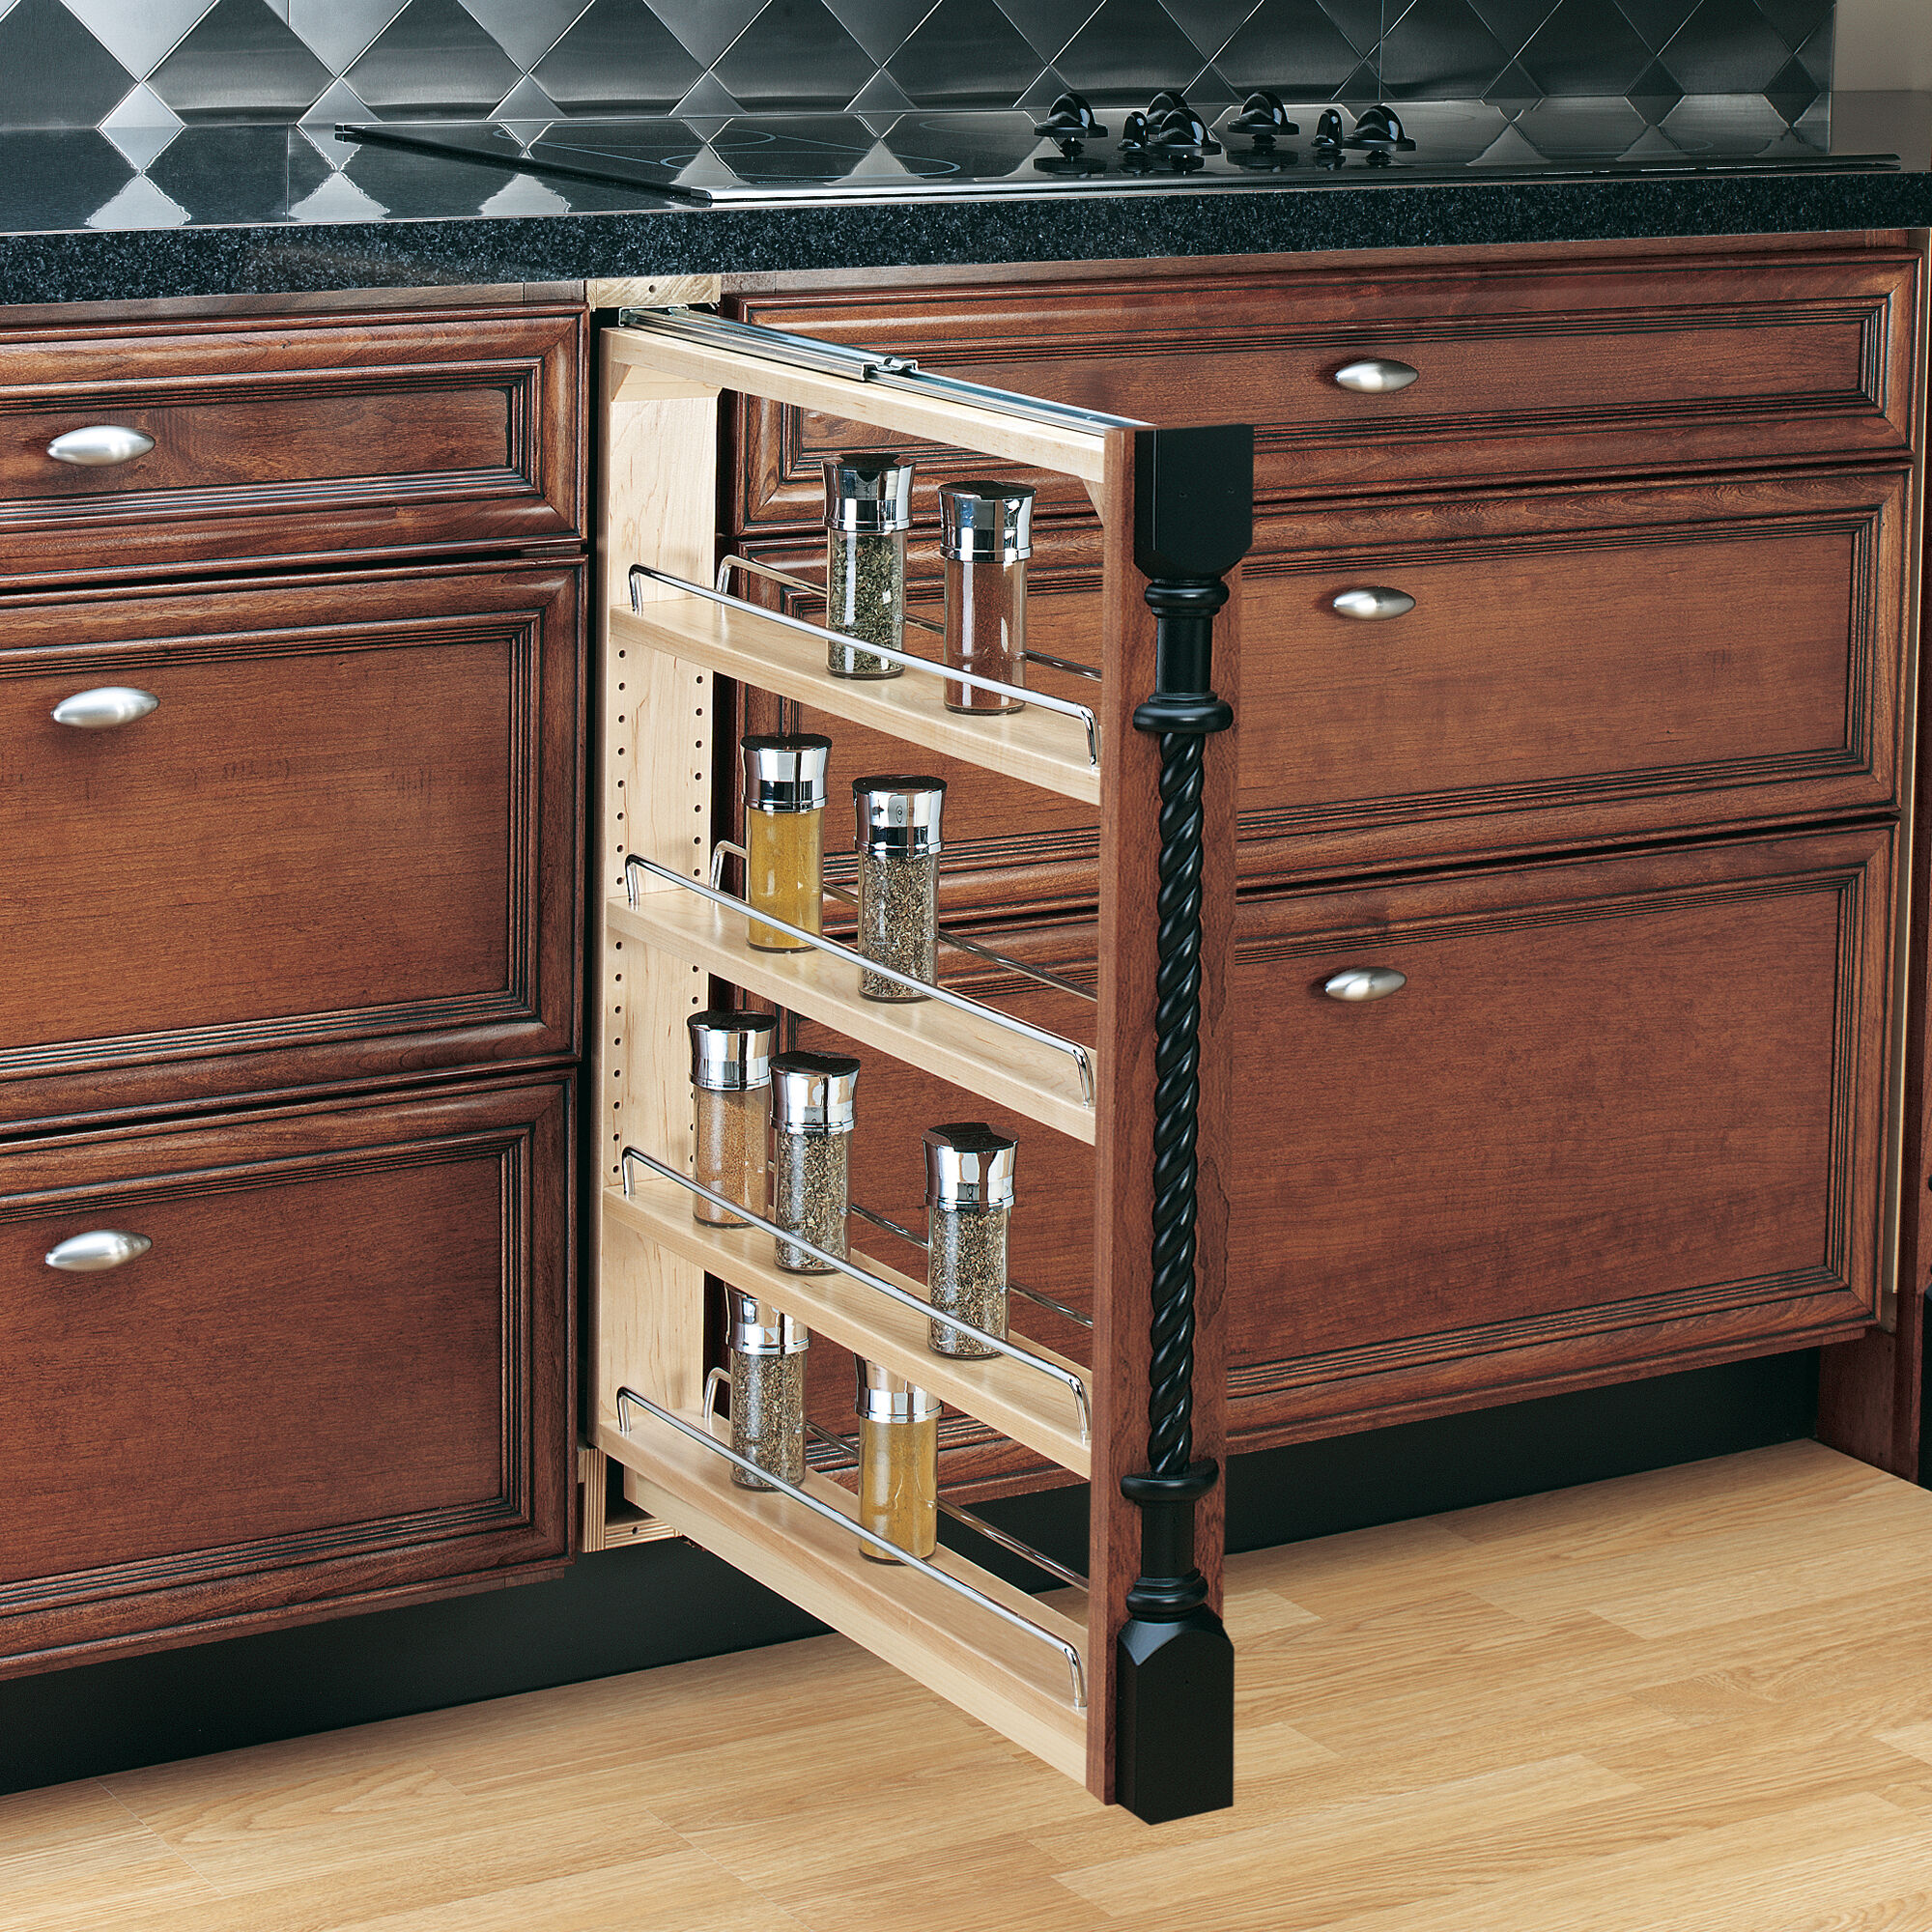 78 Best Pull Out Shelves/Kitchen Cabinets ideas  pull out shelves, shelf  kitchen cabinets, shelves